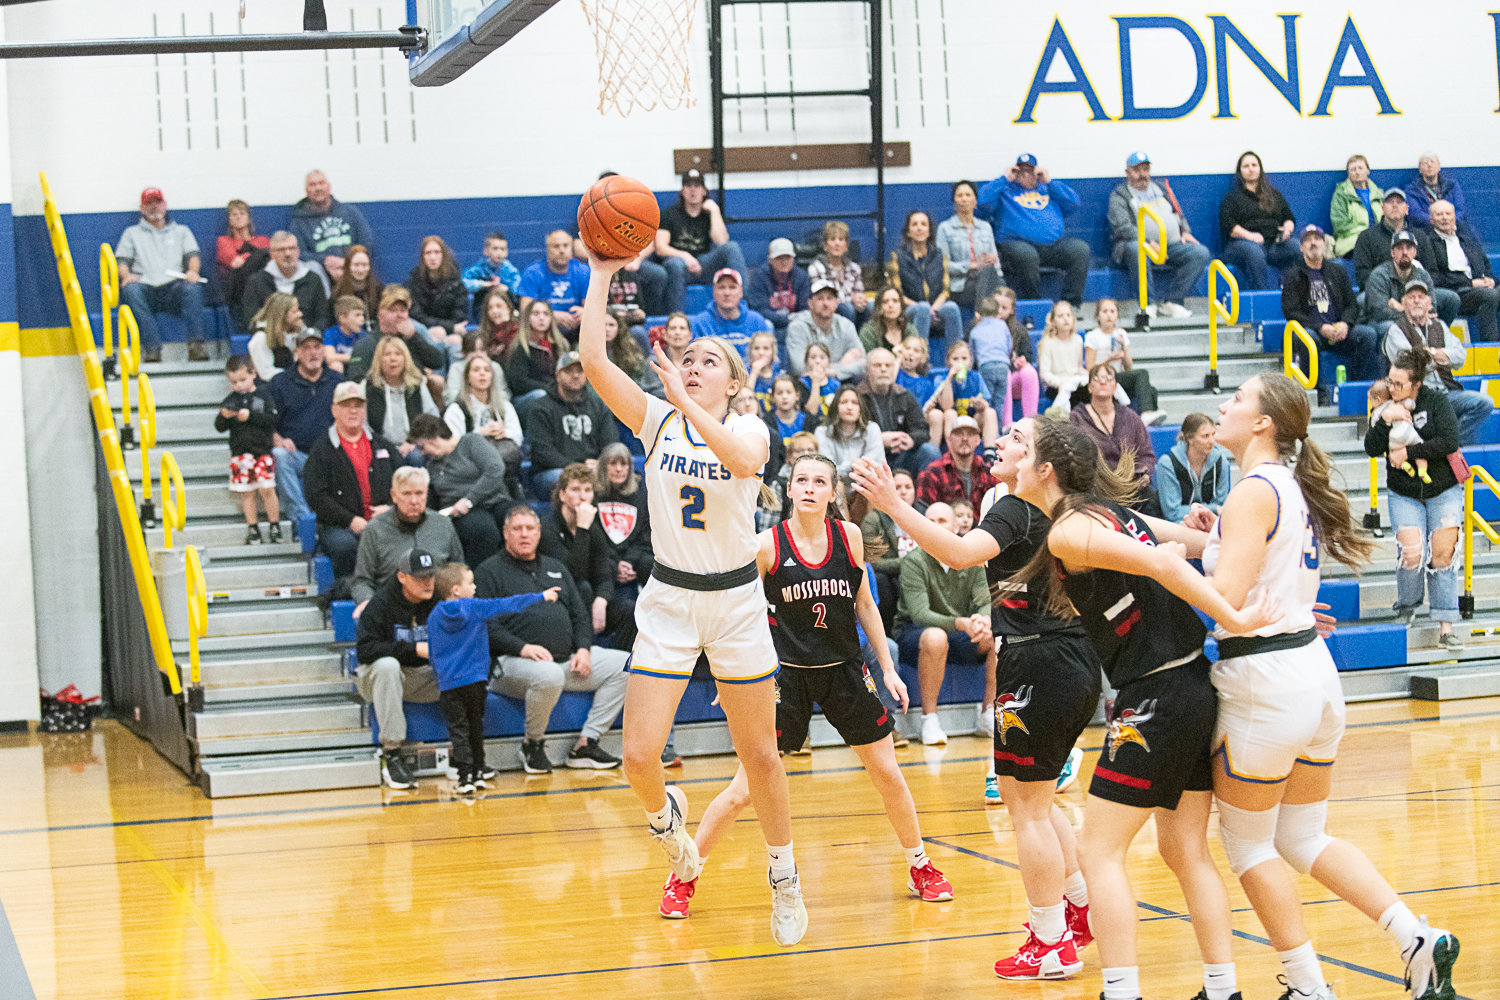 Danika Hallom goes up for a layup in the first quarter of Adna's 58-48 win over Mossyrock on Jan. 27.